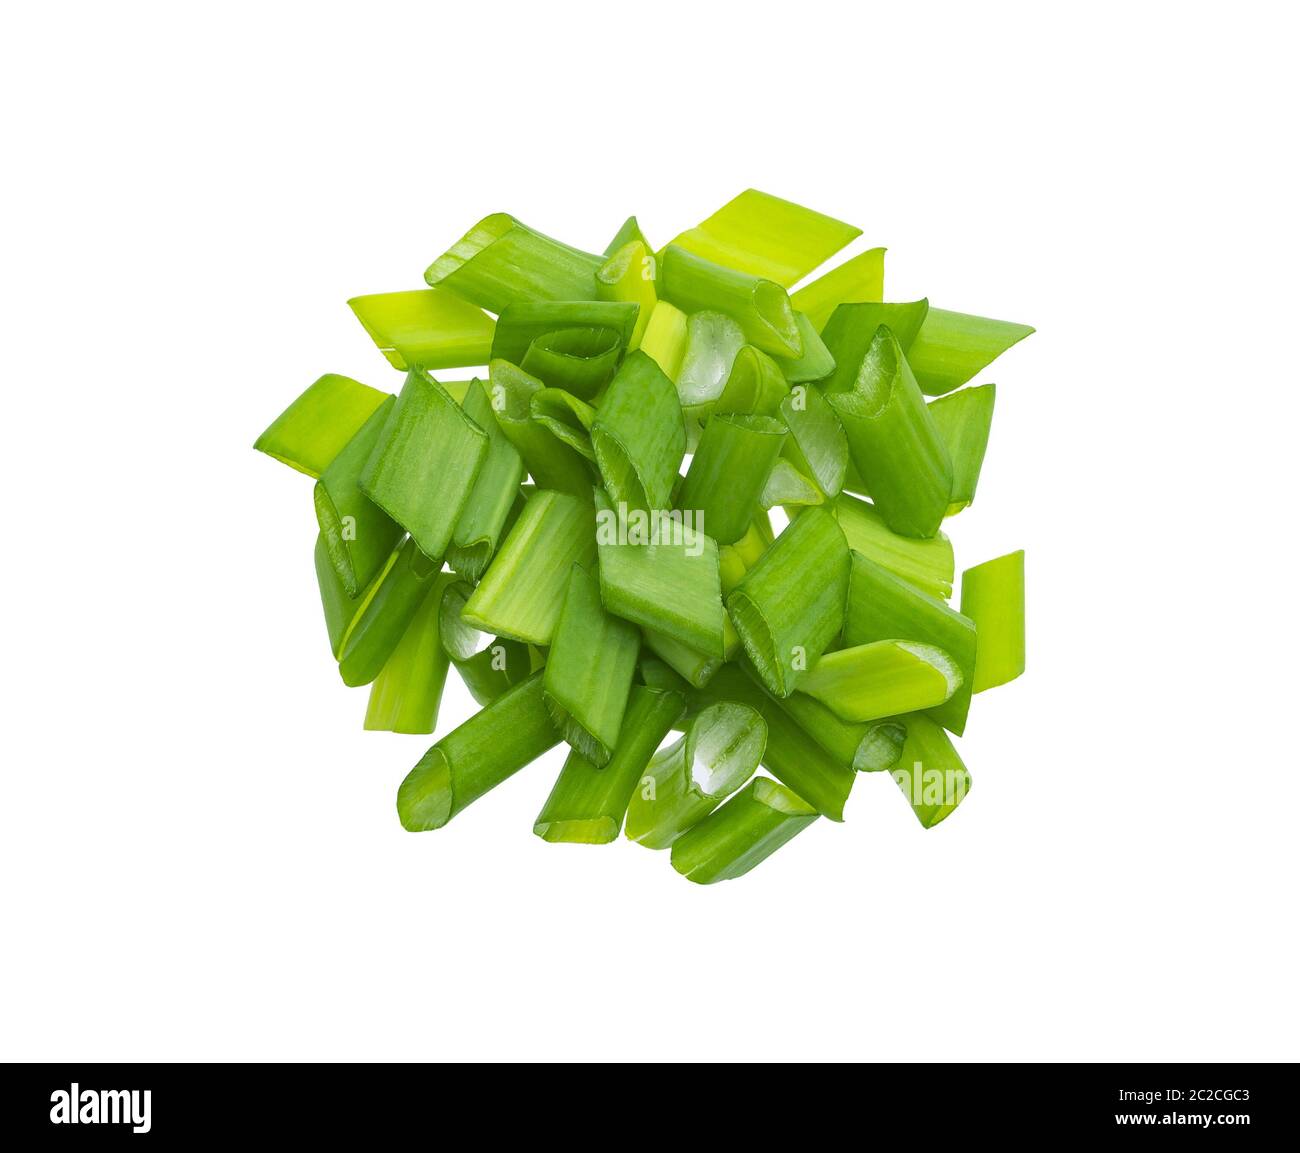 https://c8.alamy.com/comp/2C2CGC3/chopped-chives-fresh-green-onions-isolated-on-white-background-top-view-2C2CGC3.jpg